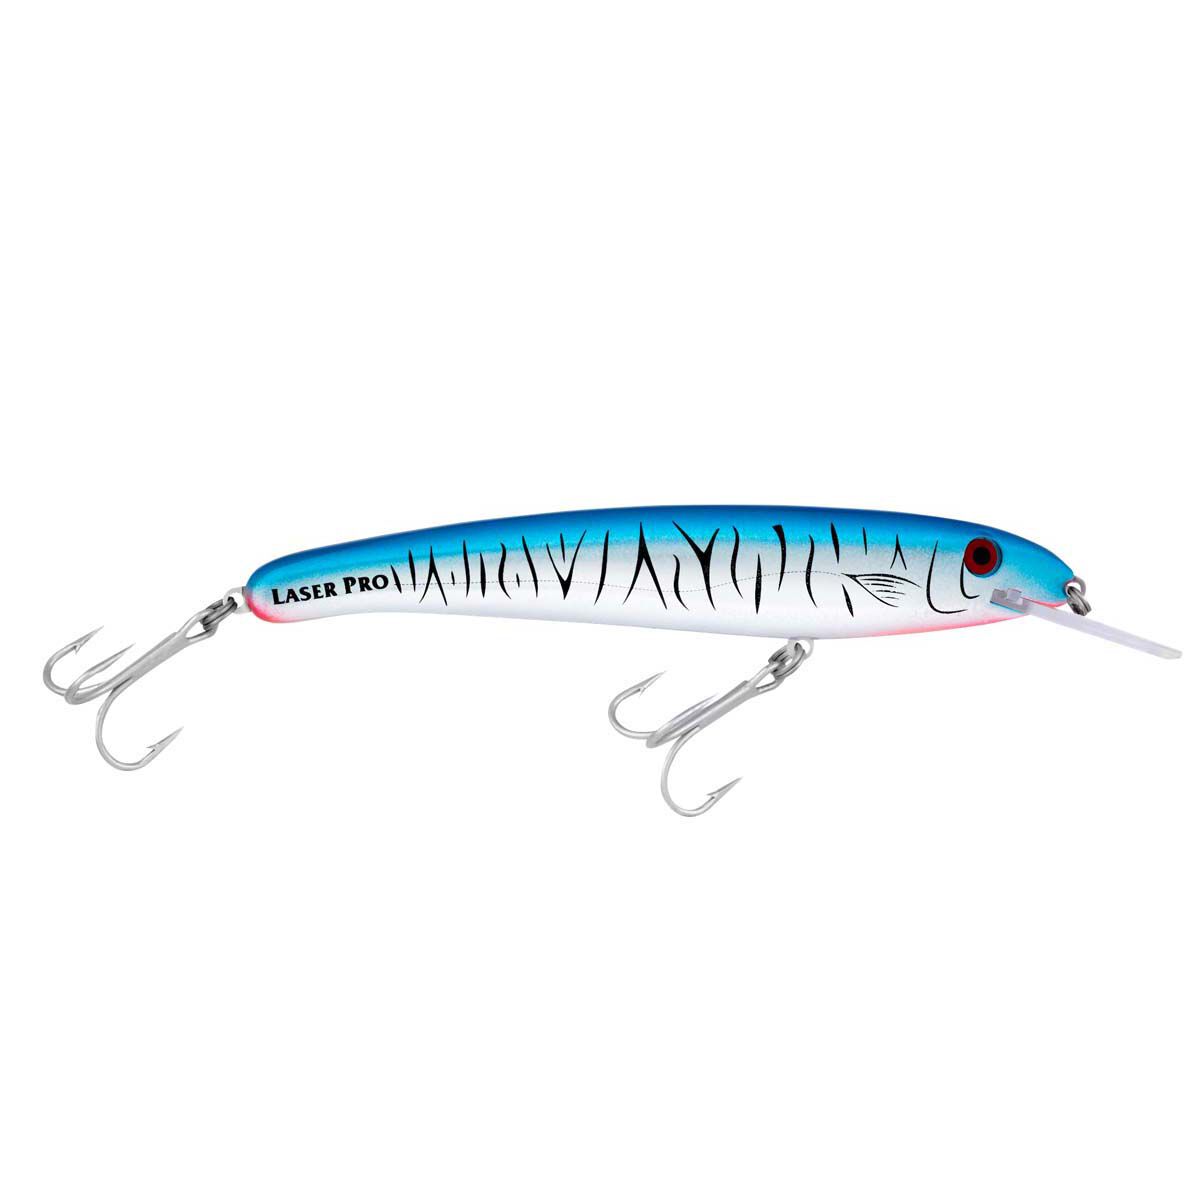 Predatek fishing lures  Tips on lure attachment